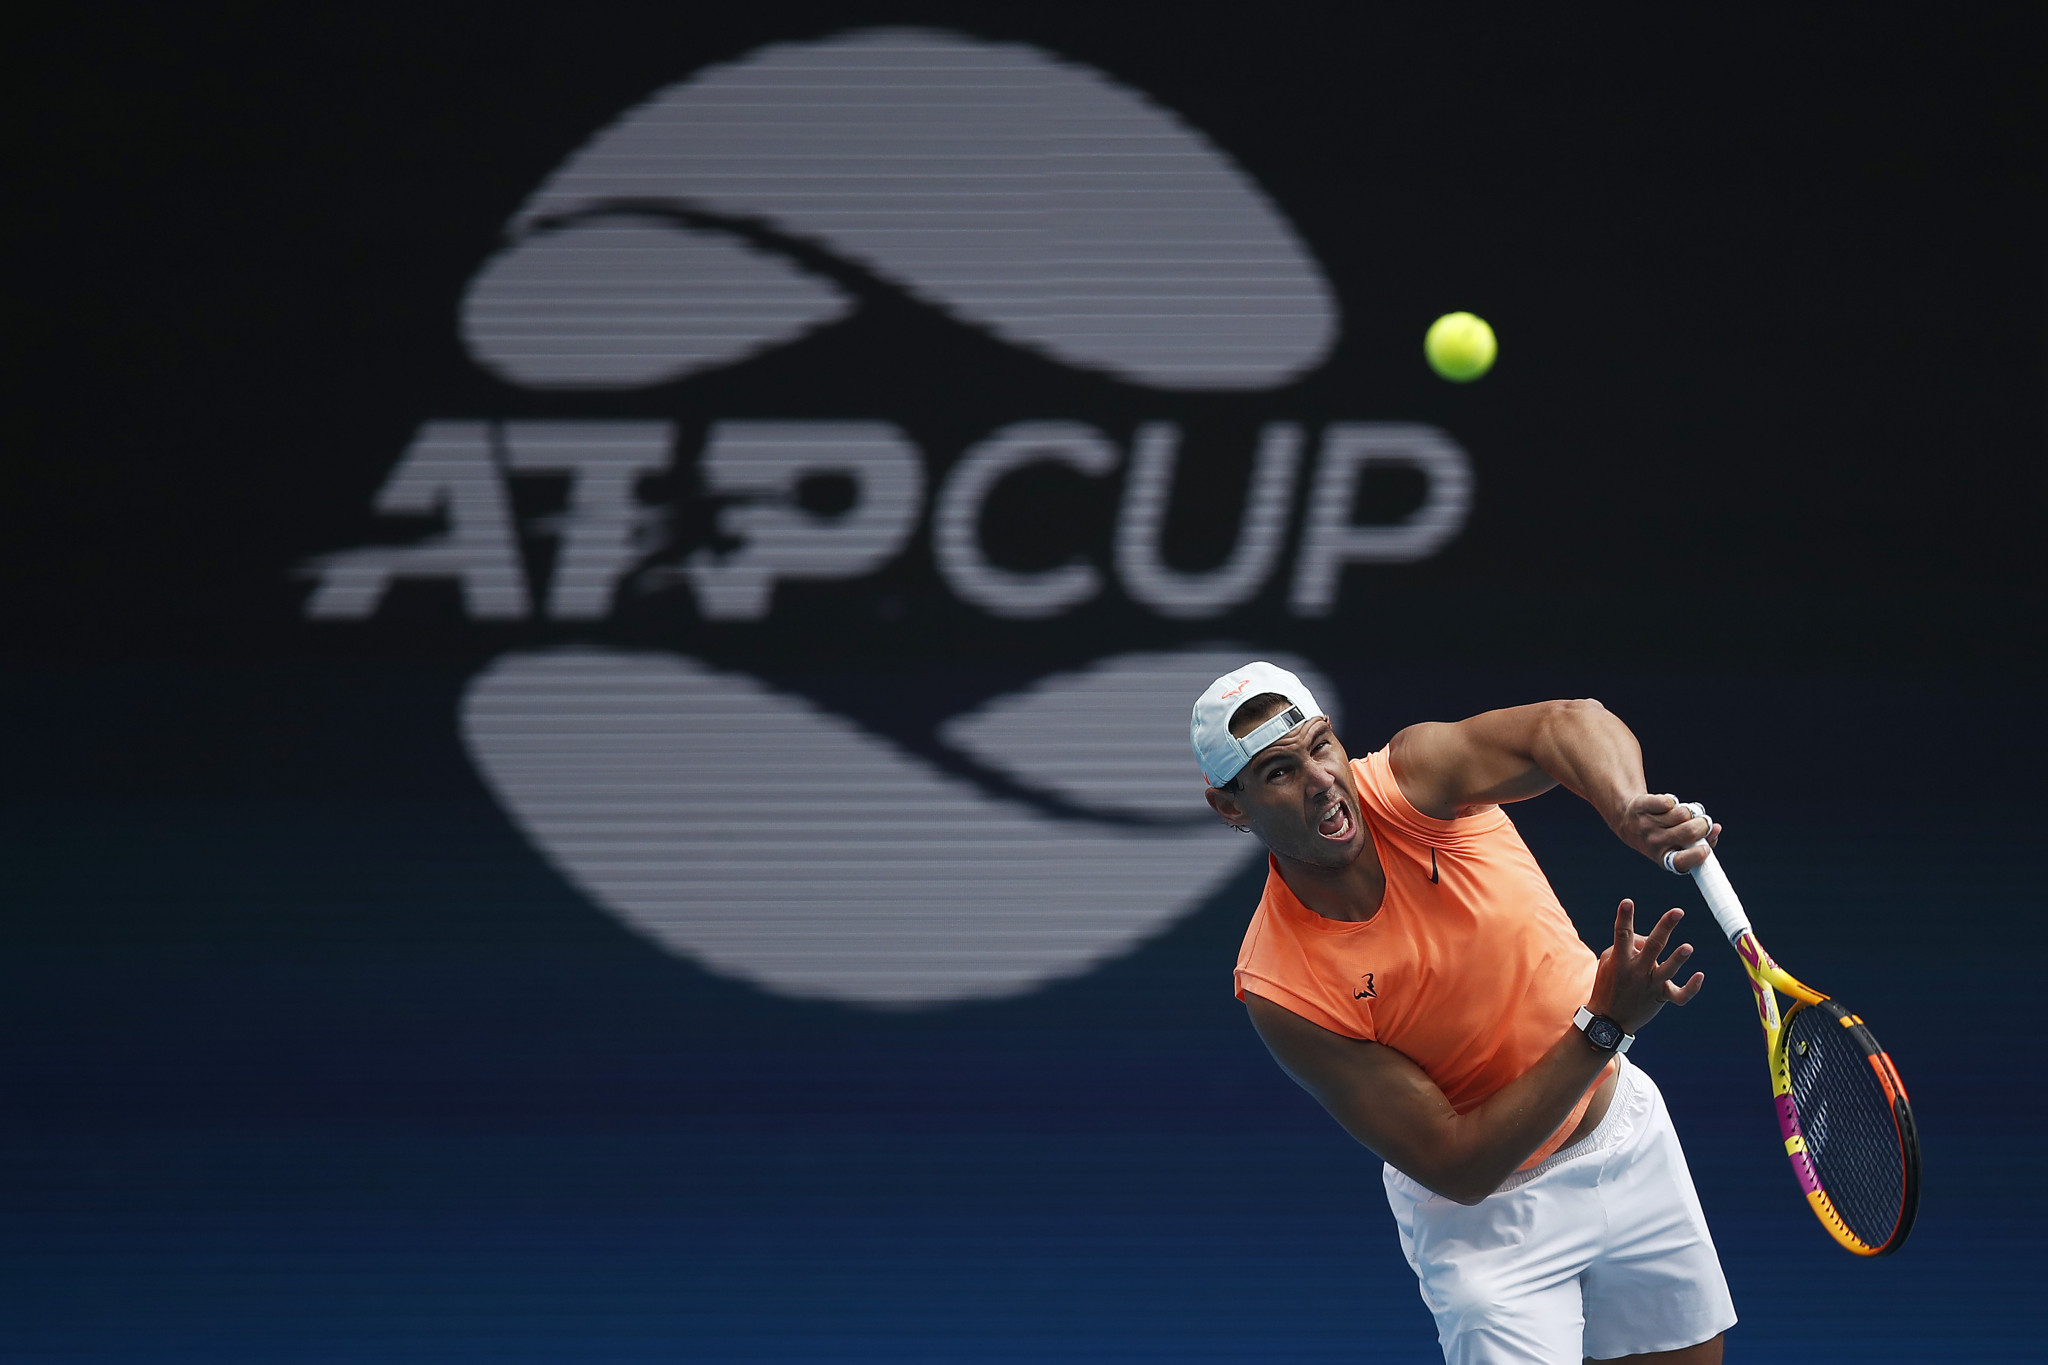 The ATP Cup was among six warm-up events at Melbourne Park that had to suspend play for today due to the positive COVID-19 case ©Getty Images